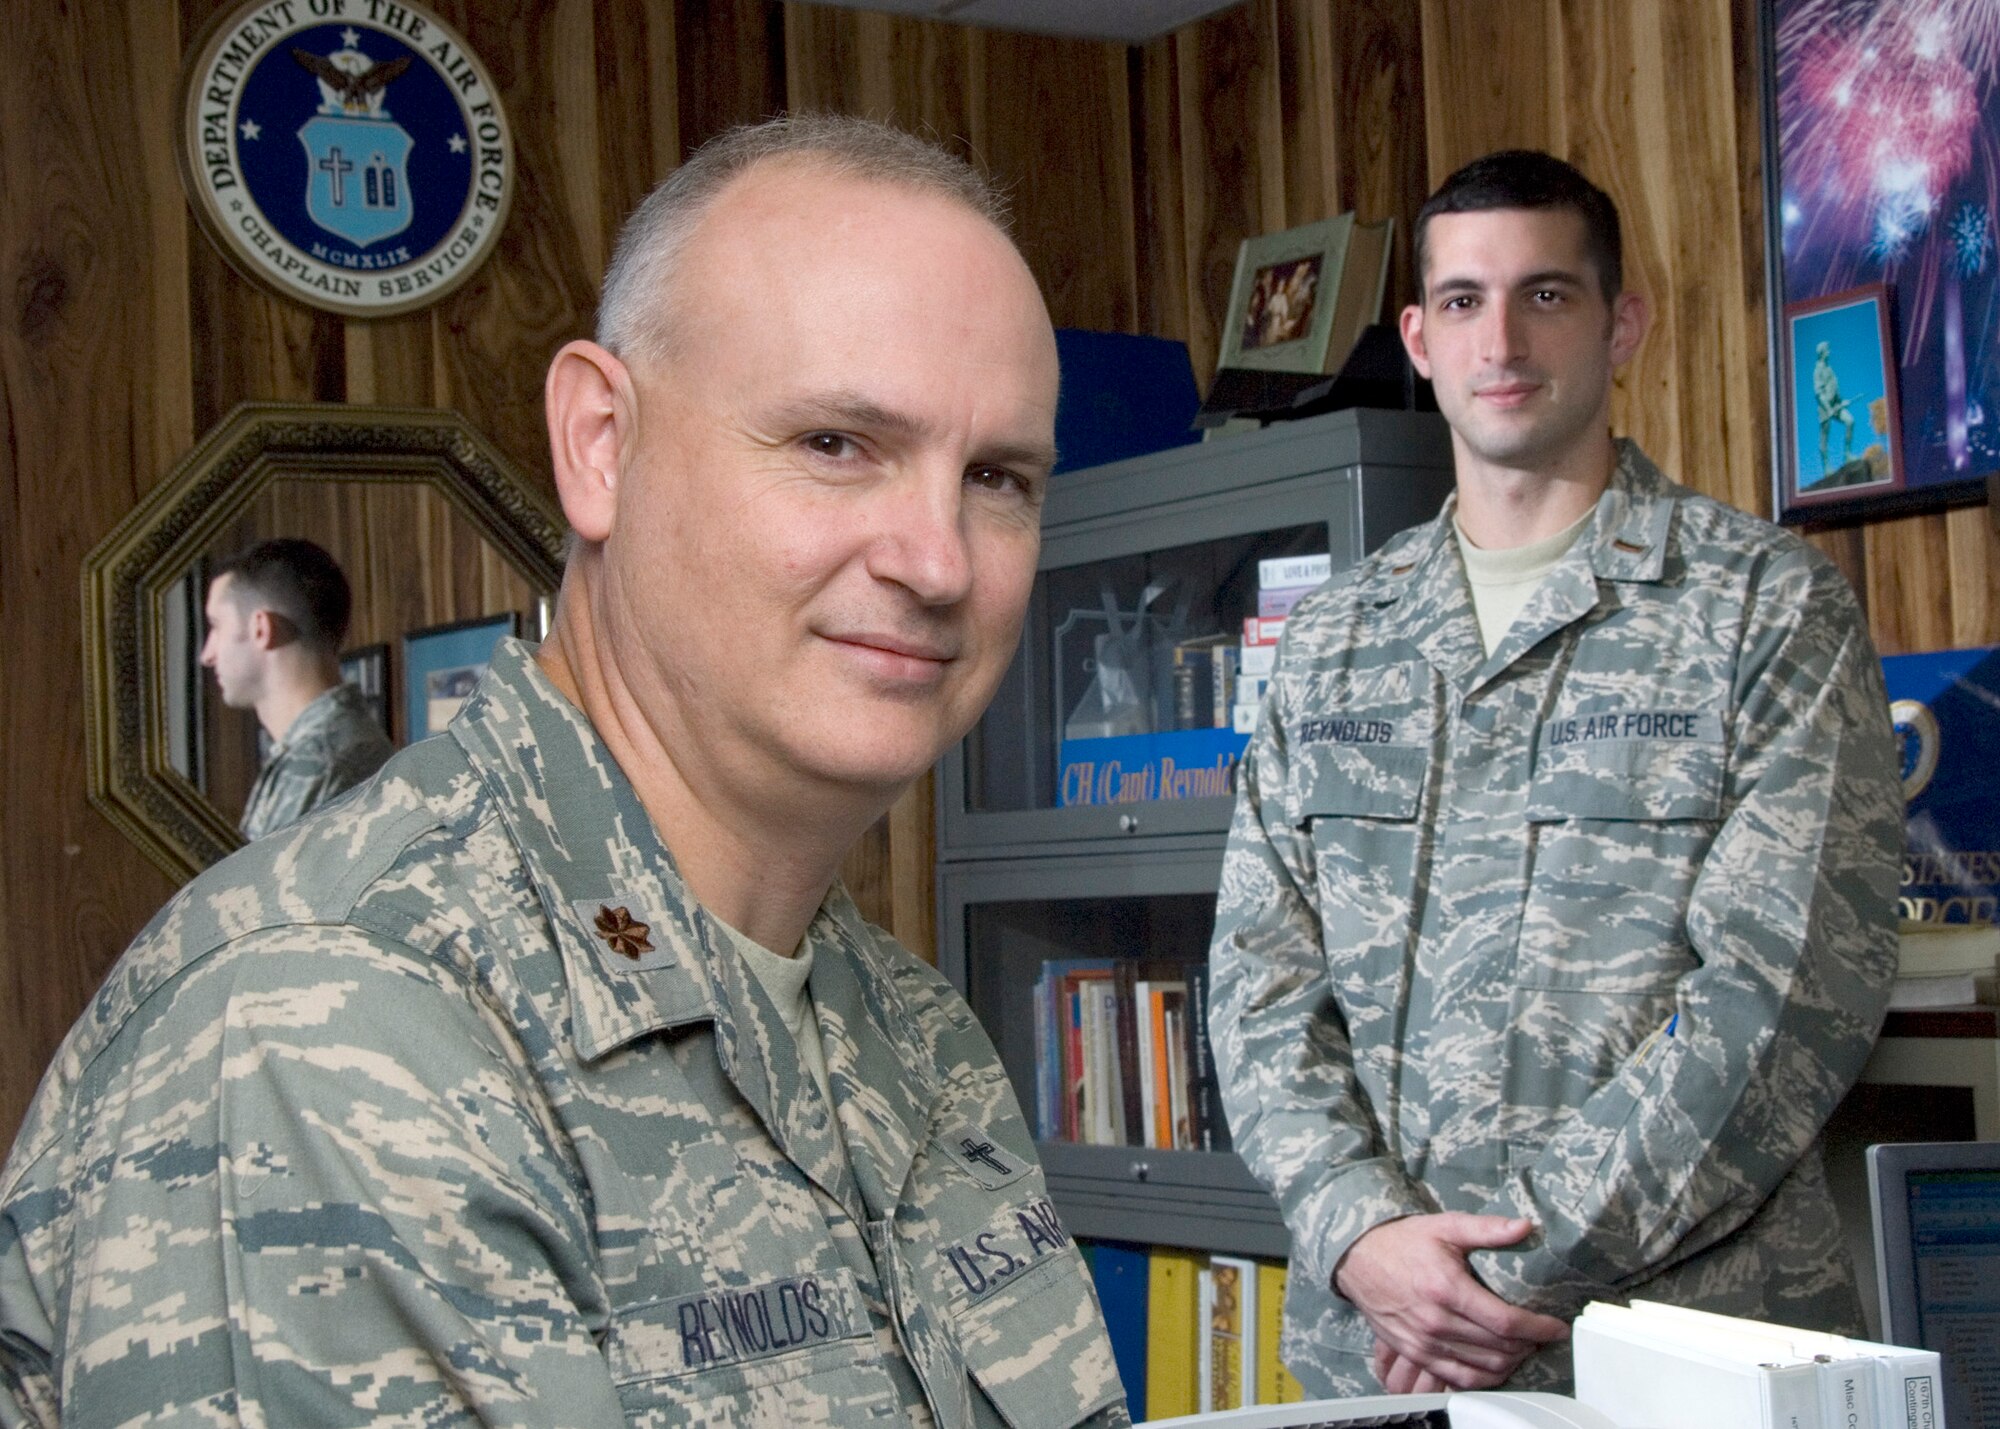 2nd Lt Aaron Reynolds, right, is doing an internship in the 167th Chapel Section, following in the footsteps of his father, Major David Reynolds, 167th Airlift Wing Chaplain. Reynolds was a member of the 167th Airlift Wing, but has transferred to the Air Reserves to participate in the chaplain candidate program. (U.S. Air Force photo by MSgt Emily Beightol-Deyerle)